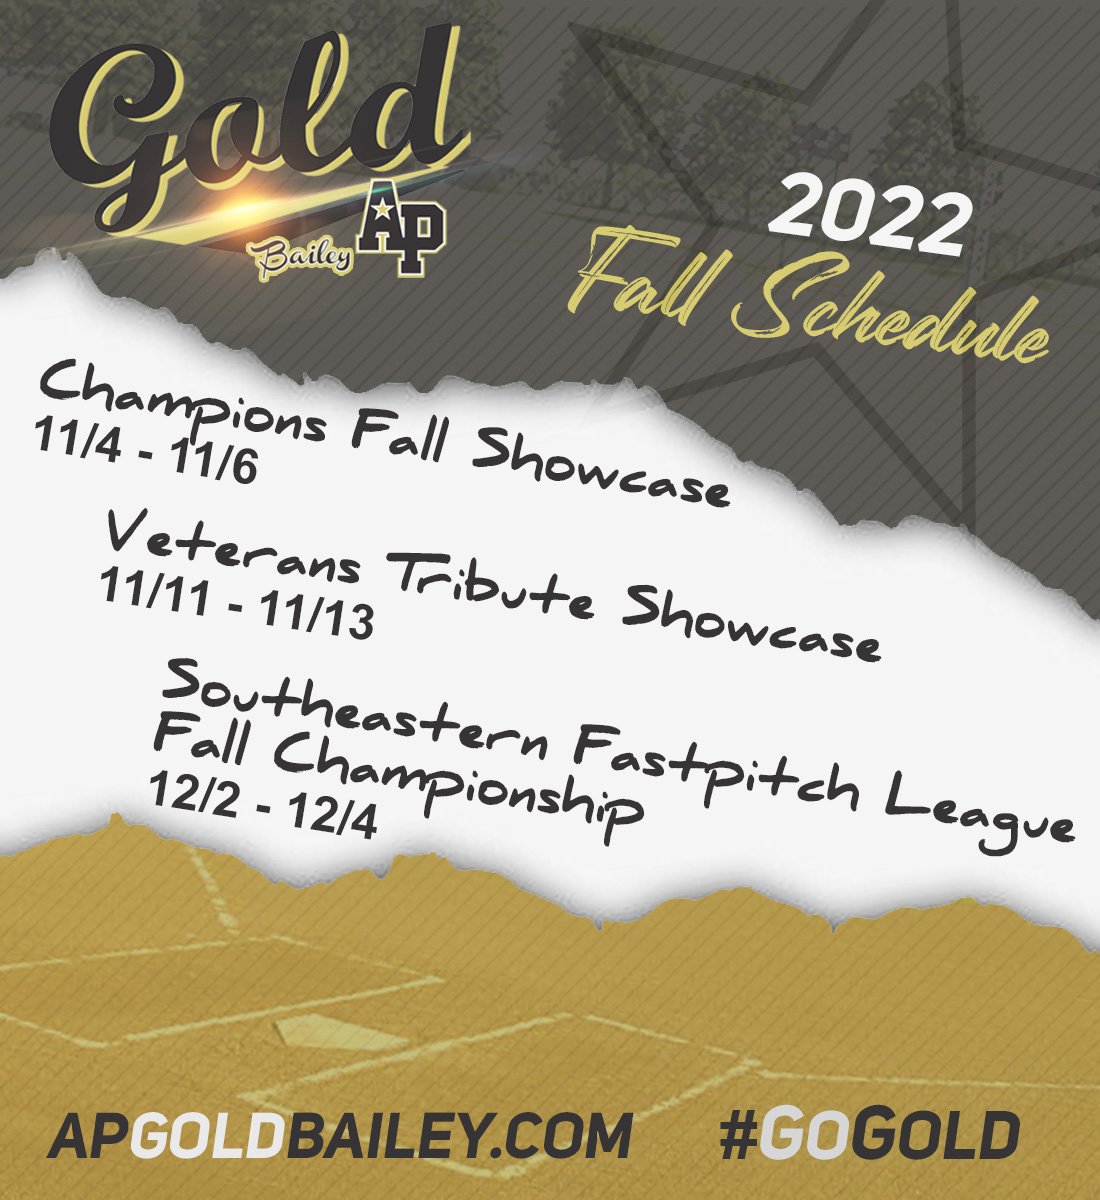 We're ramping up for the 2022 fall season. Can't wait to get back out on the field!! #apgoldbailey #gogold 💛🖤🤍